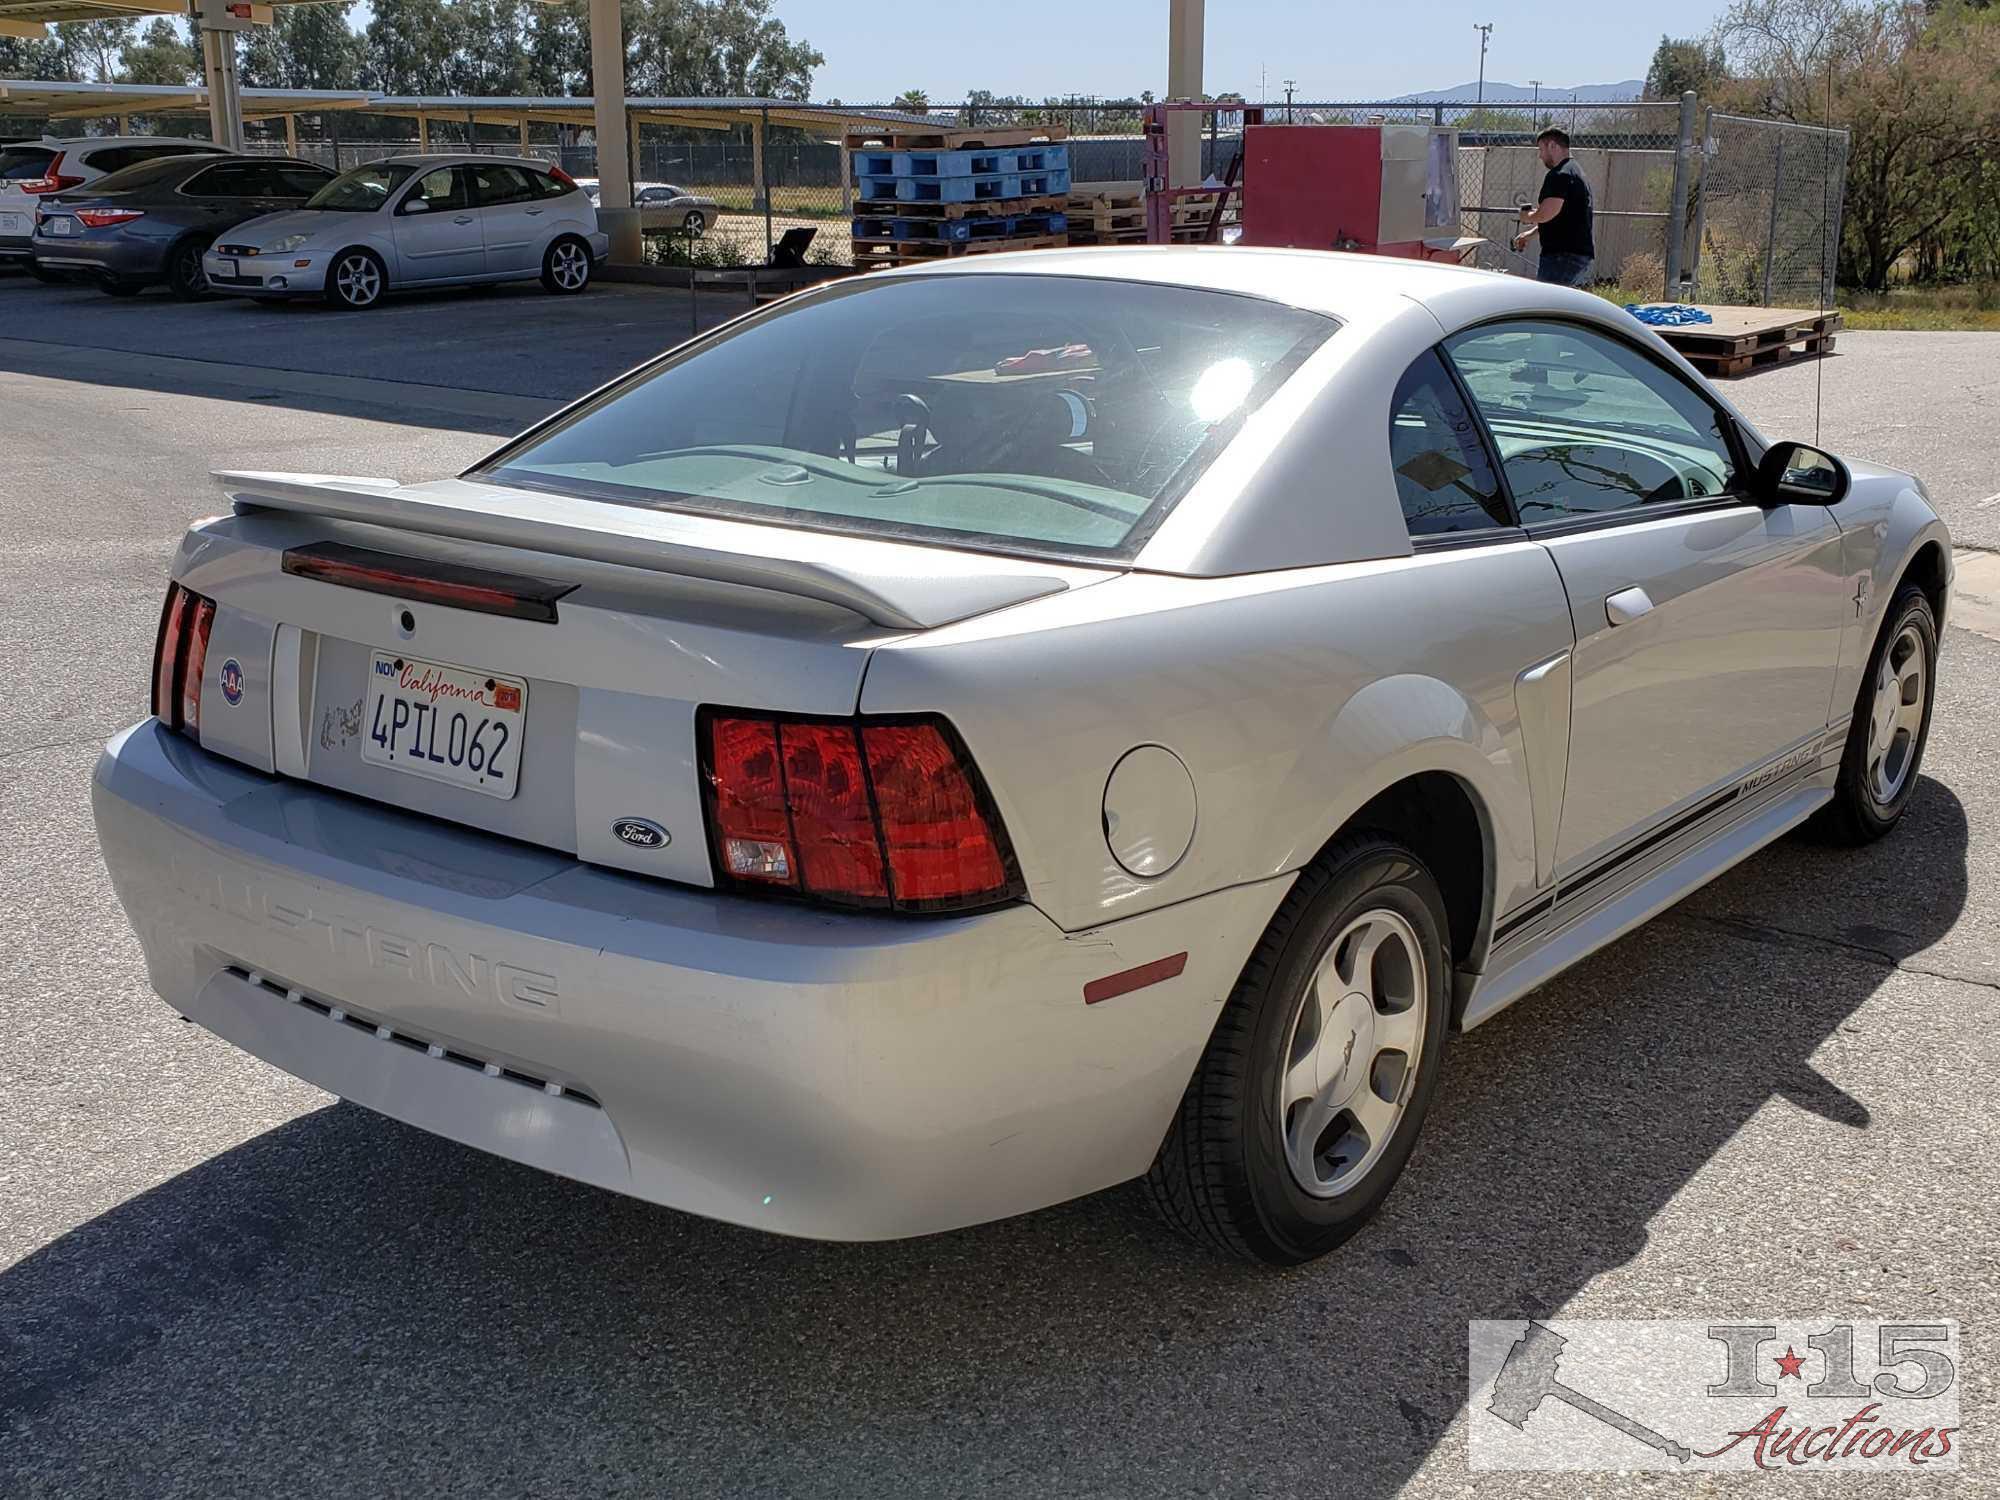 2000 Ford Mustang Silver with Current Smog, ONLY 42,XXX MILES!!